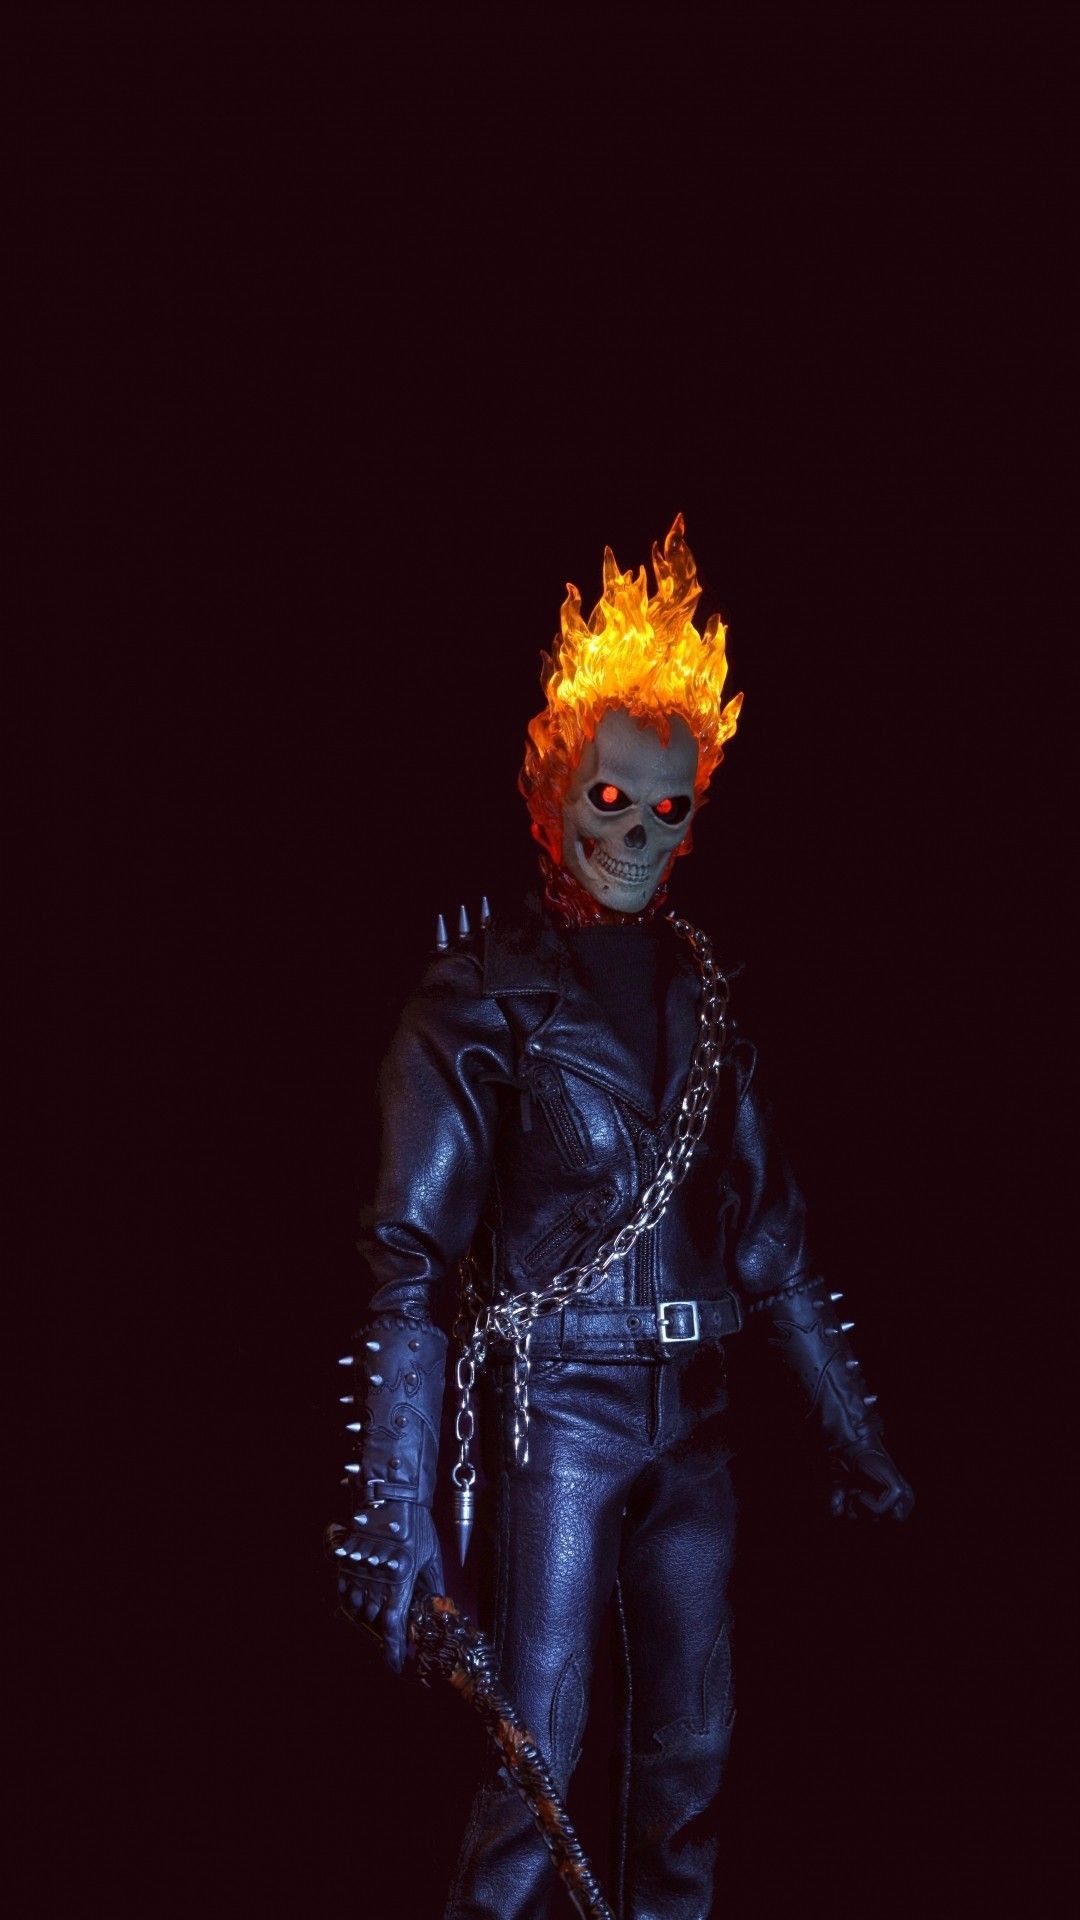 1080x Ghost Rider Mobile Wallpaper 1080p For